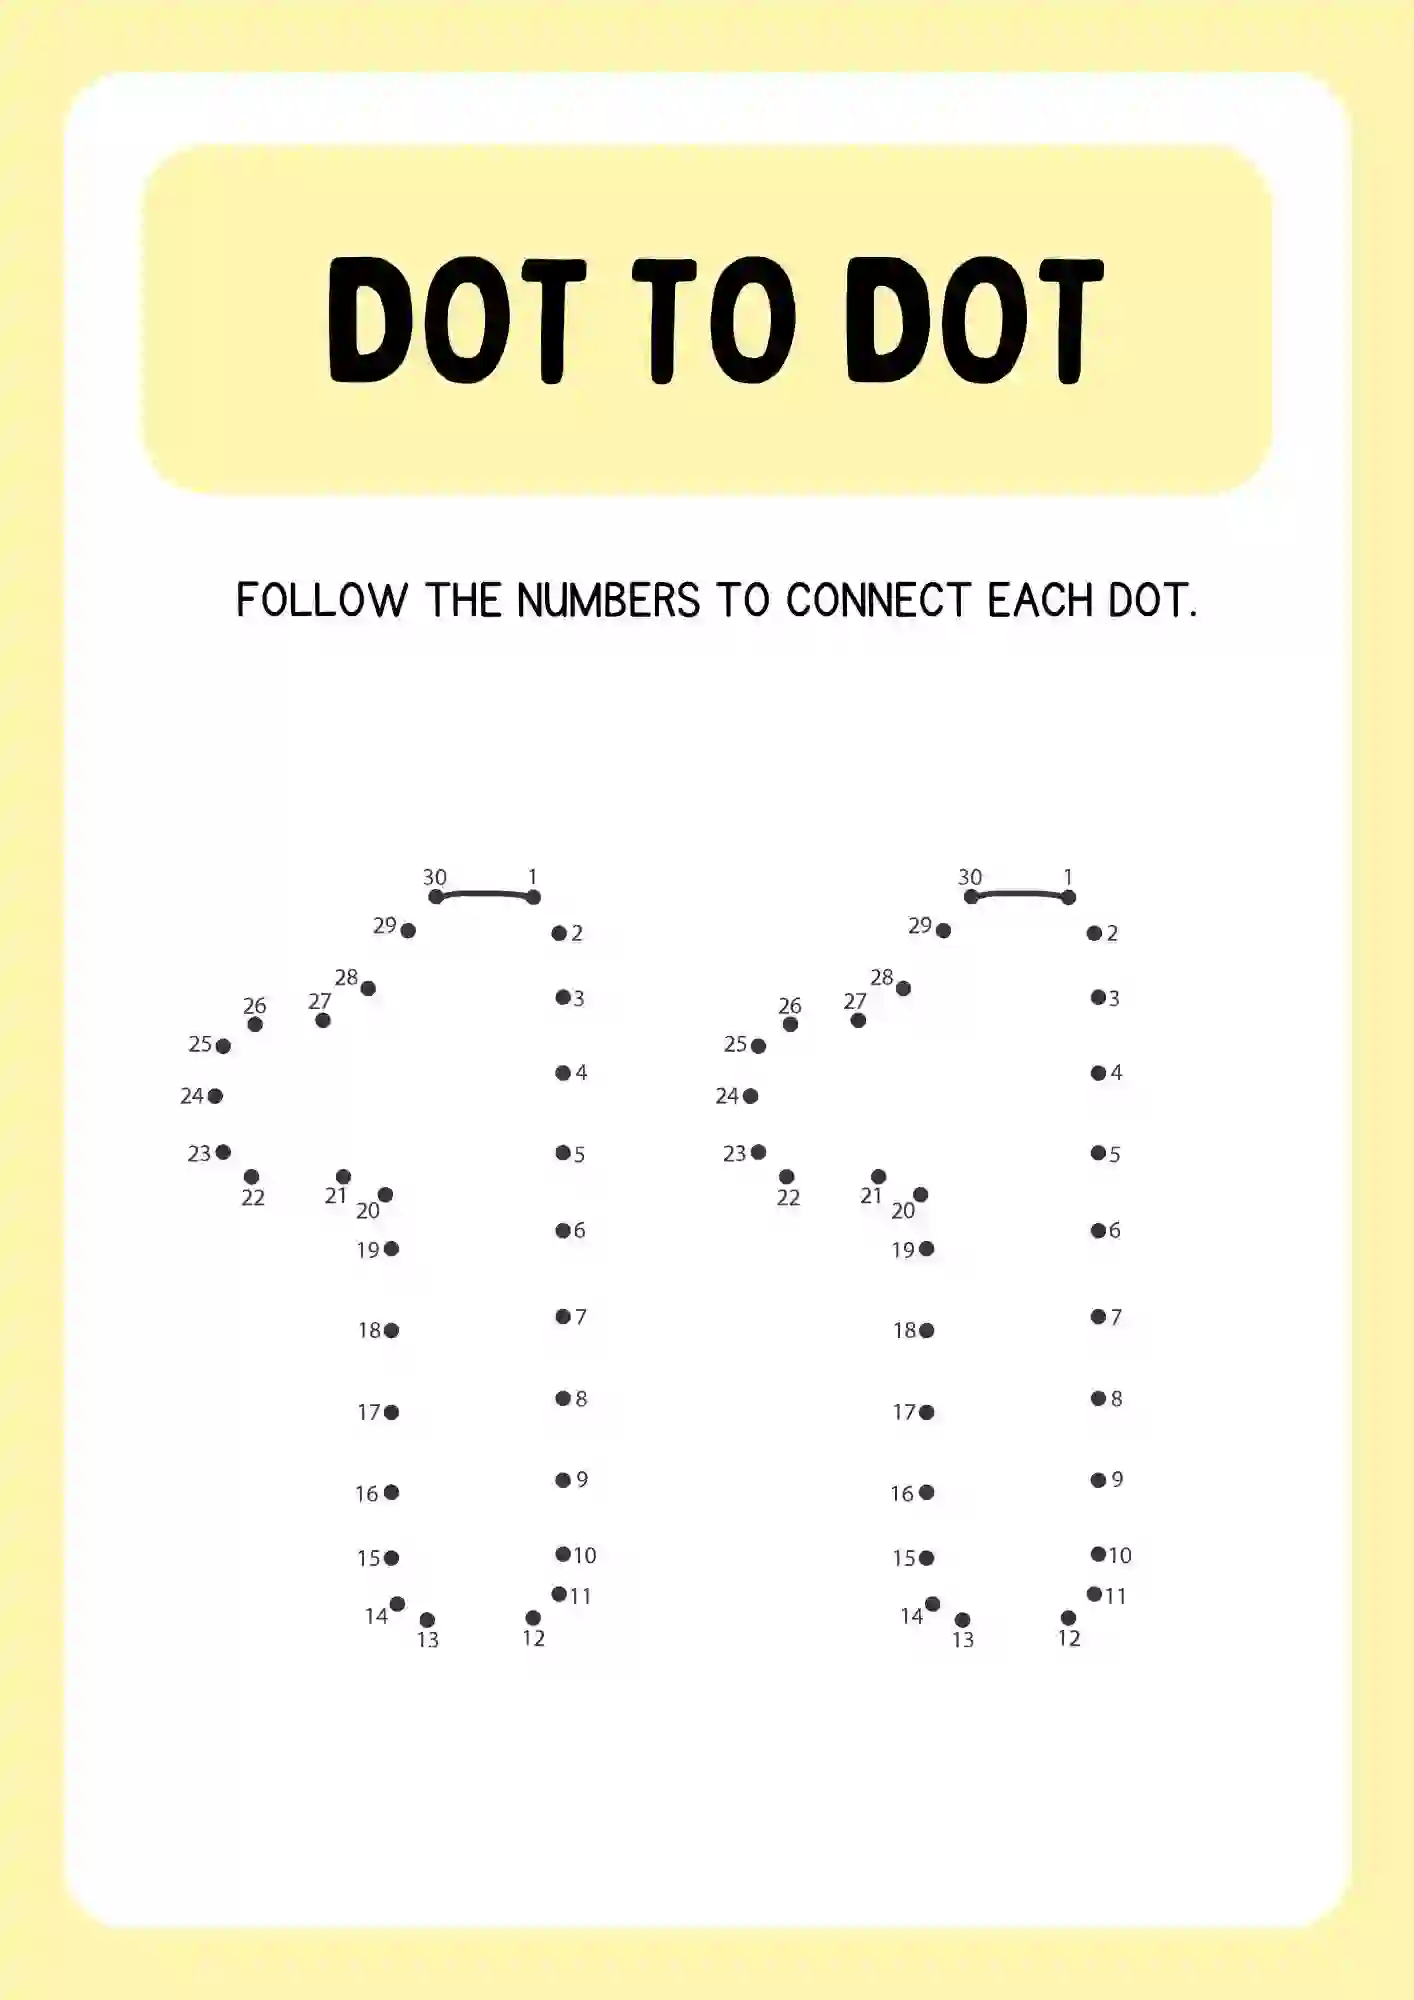 Dot to Dot Connecting Numbers Activity Worksheets number 11